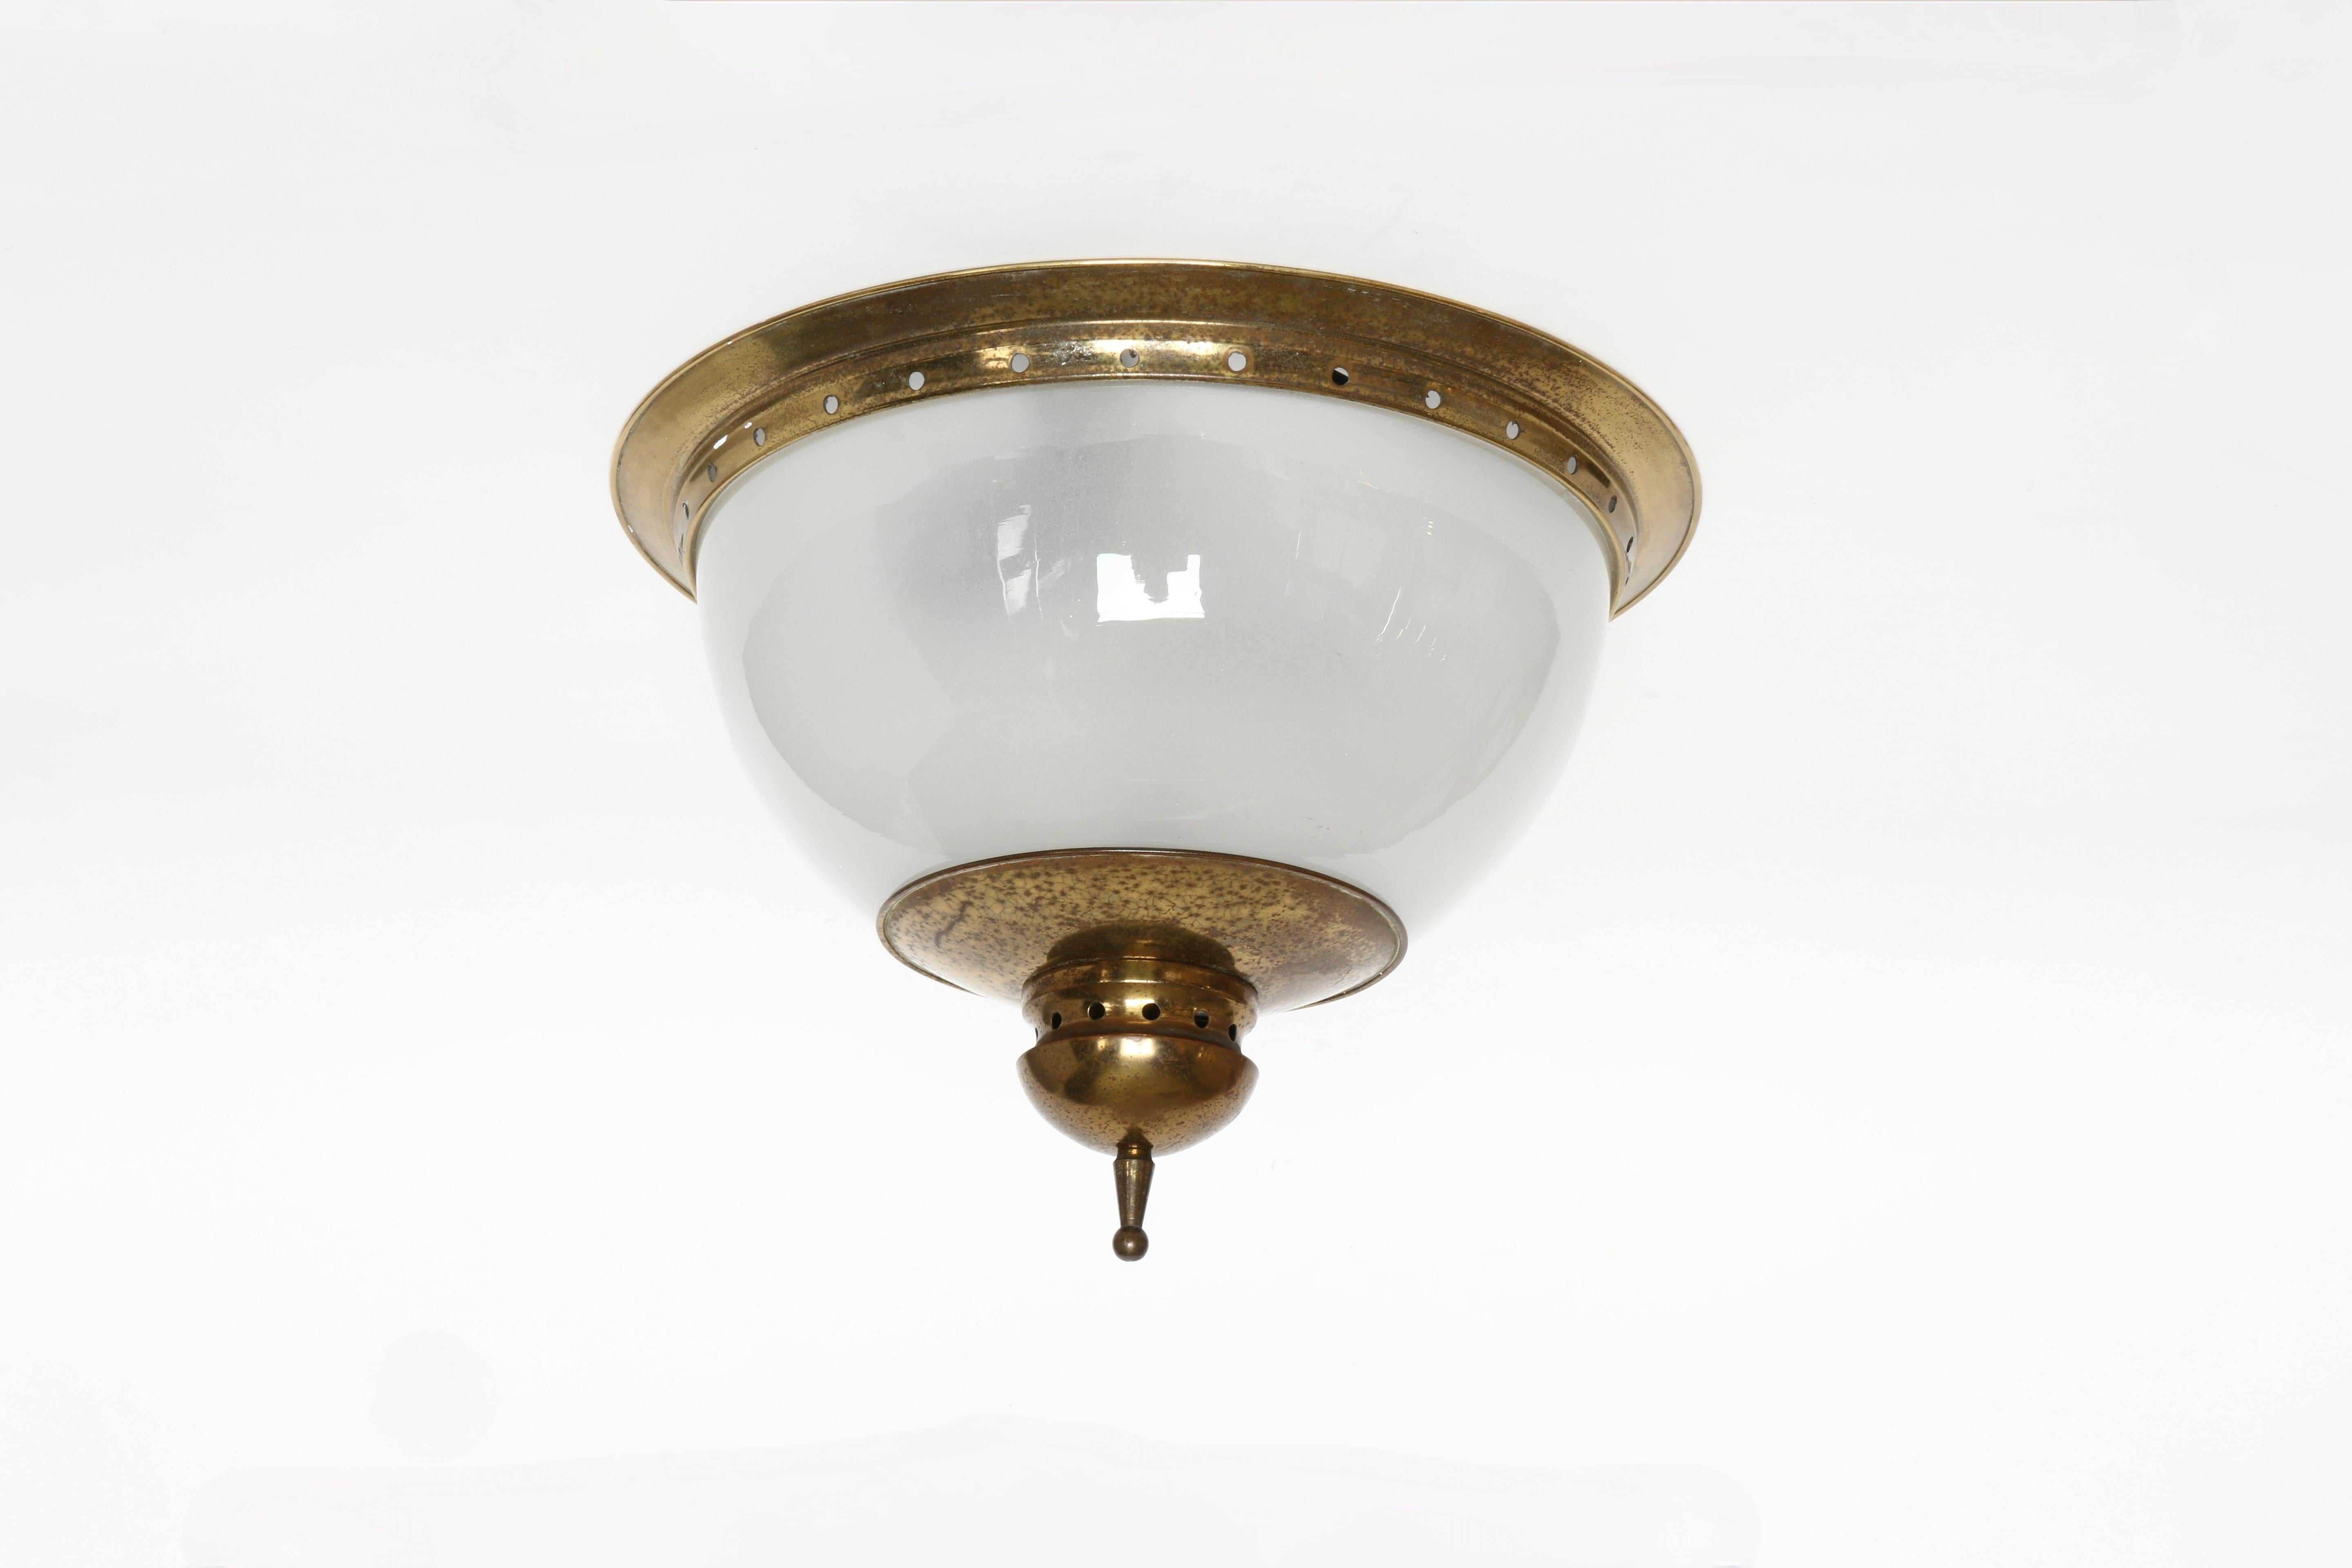 Luigi Caccia Dominioni for Azucena wall or ceiling light
Made in Italy, 1960s
Opalescent glass, brass
Takes 2 Edison base bulbs
Complimentary US rewiring upon request
Price is for 1 light
3 lights are available.

We take pride in bringing vintage